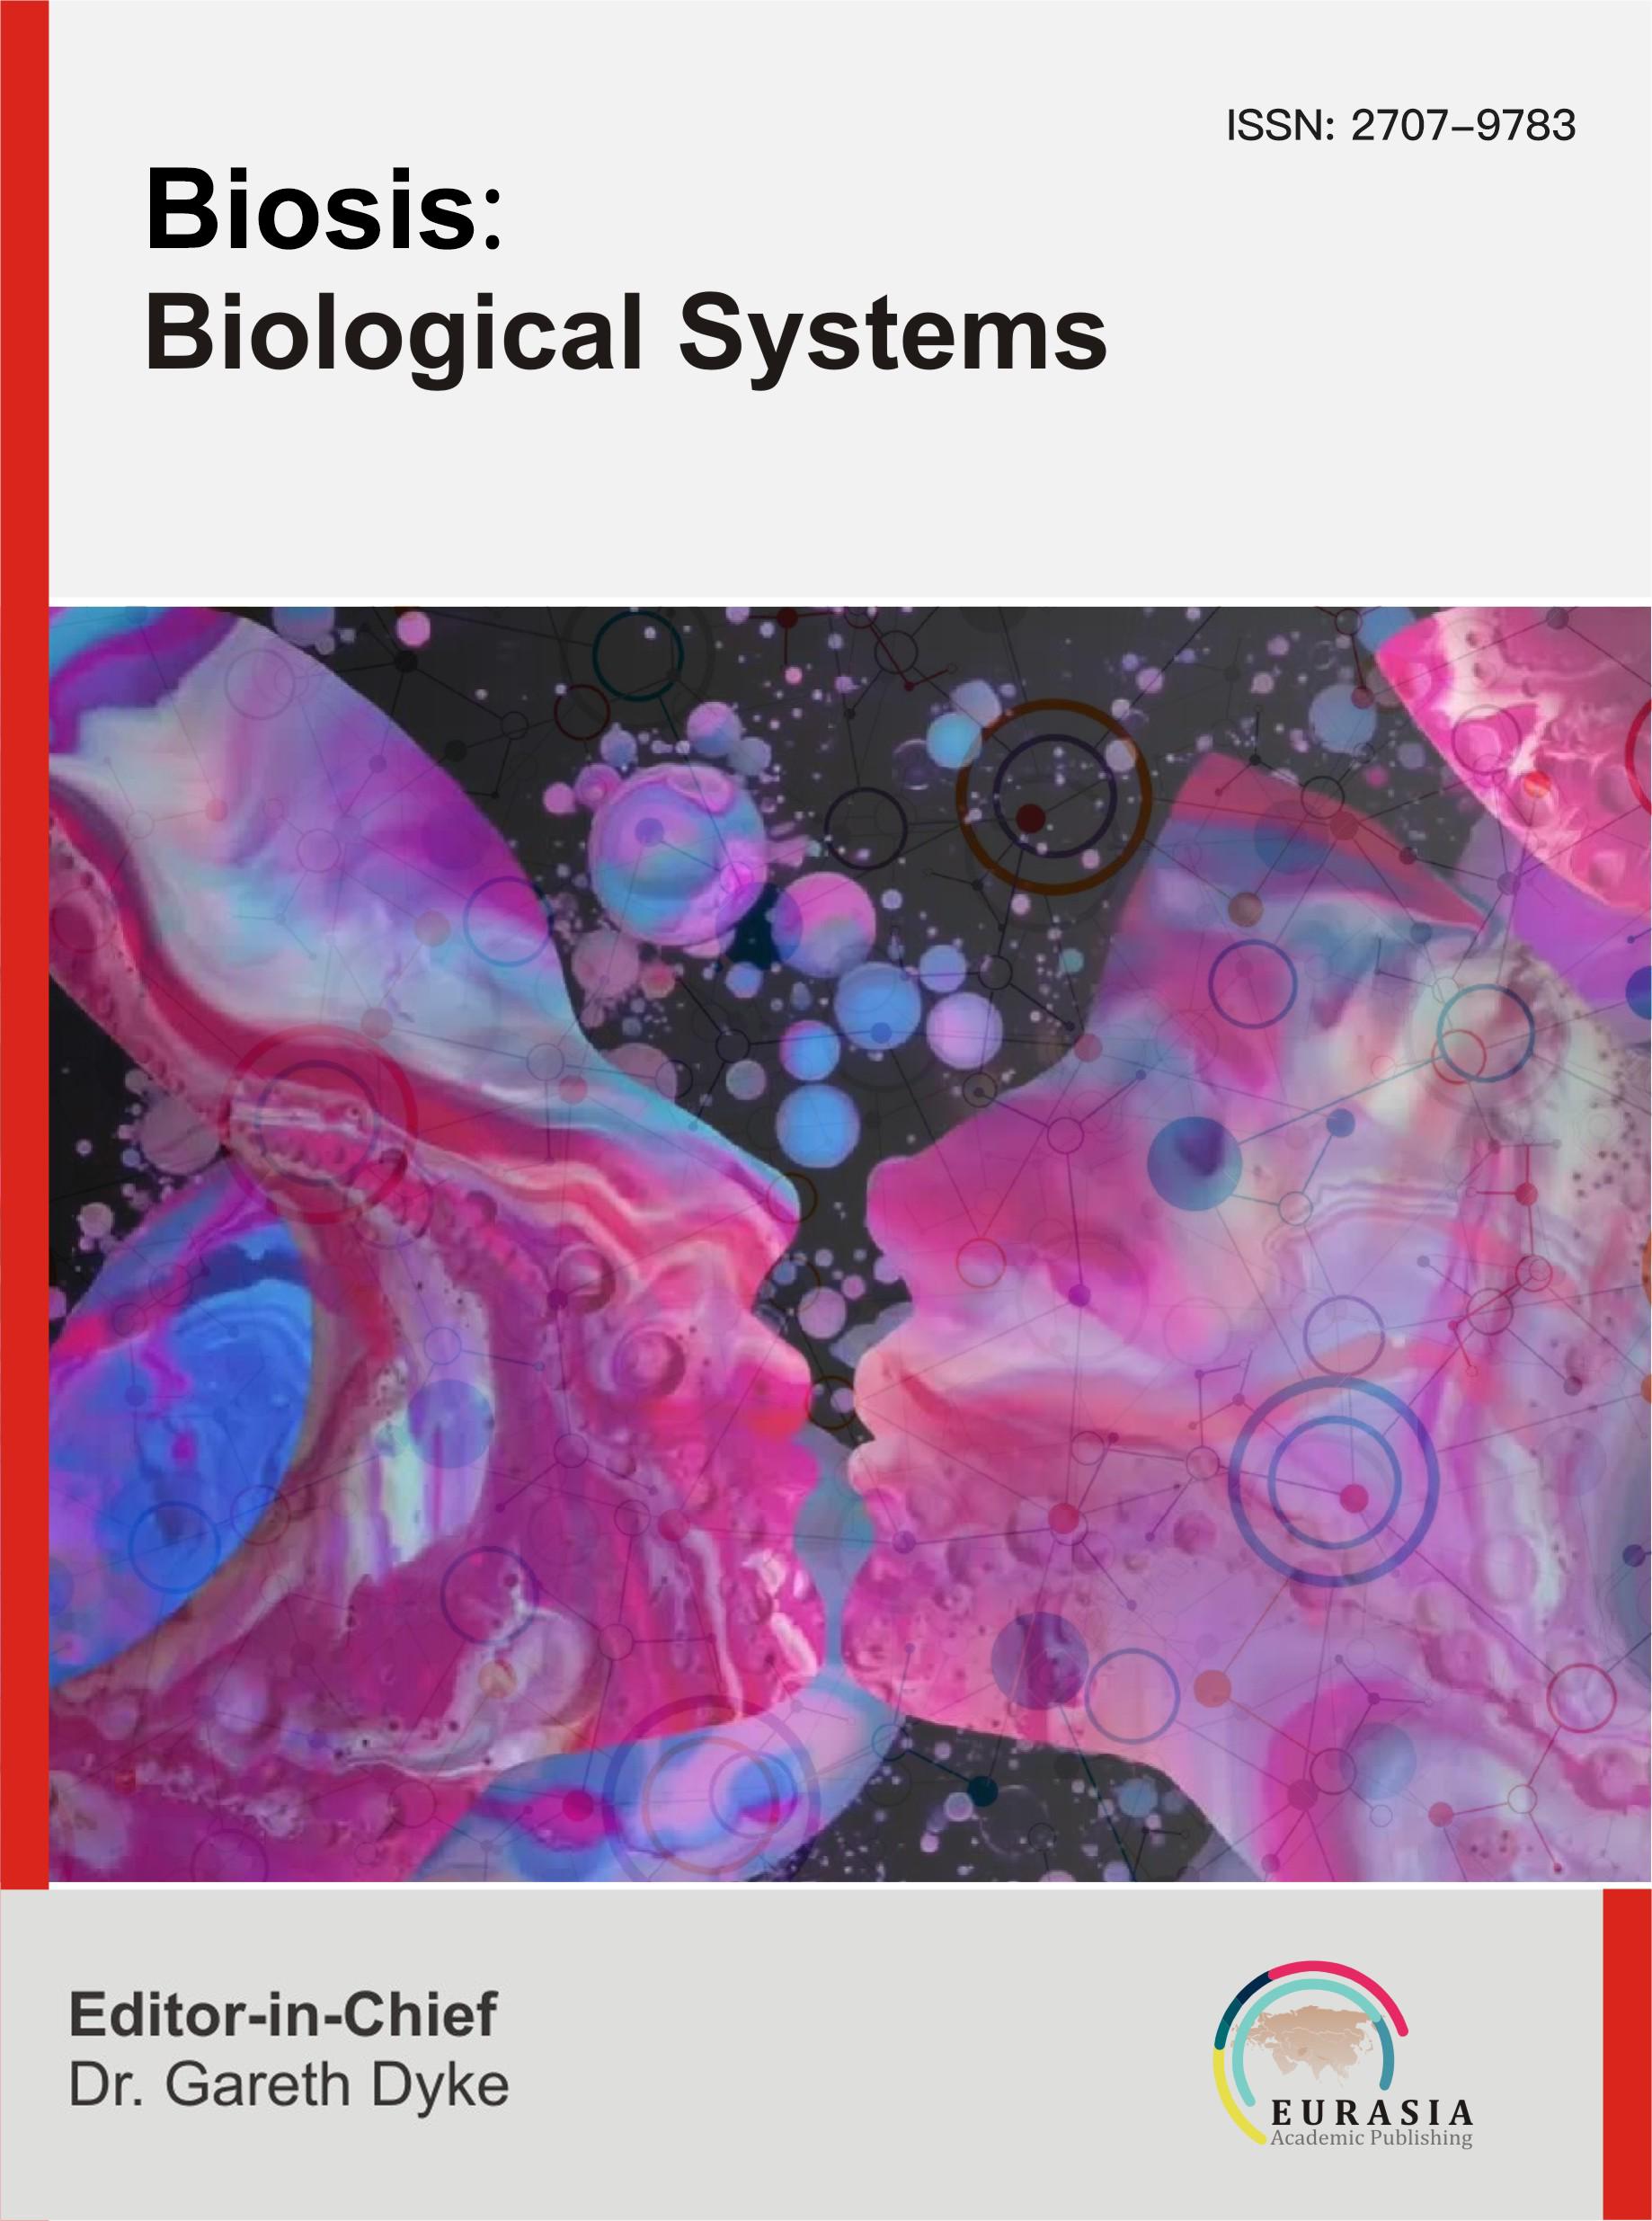 					View Vol. 1 No. 4 (2020): Biosis: Biological Systems
				